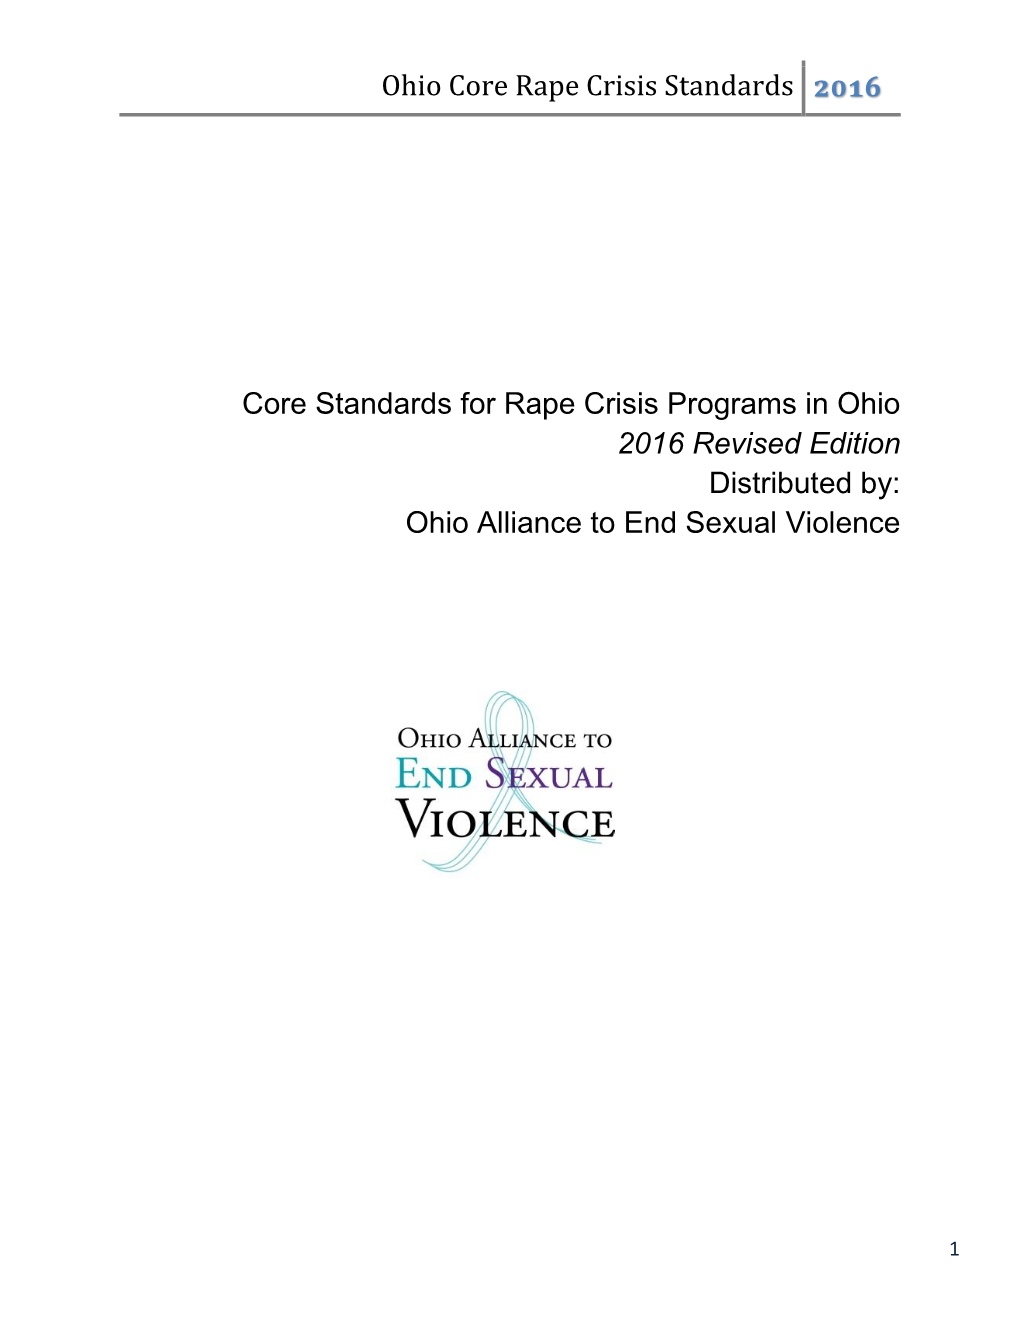 Core Standards for Rape Crisis Programs in Ohio 2016 Revised Edition Distributed By: Ohio Alliance to End Sexual Violence